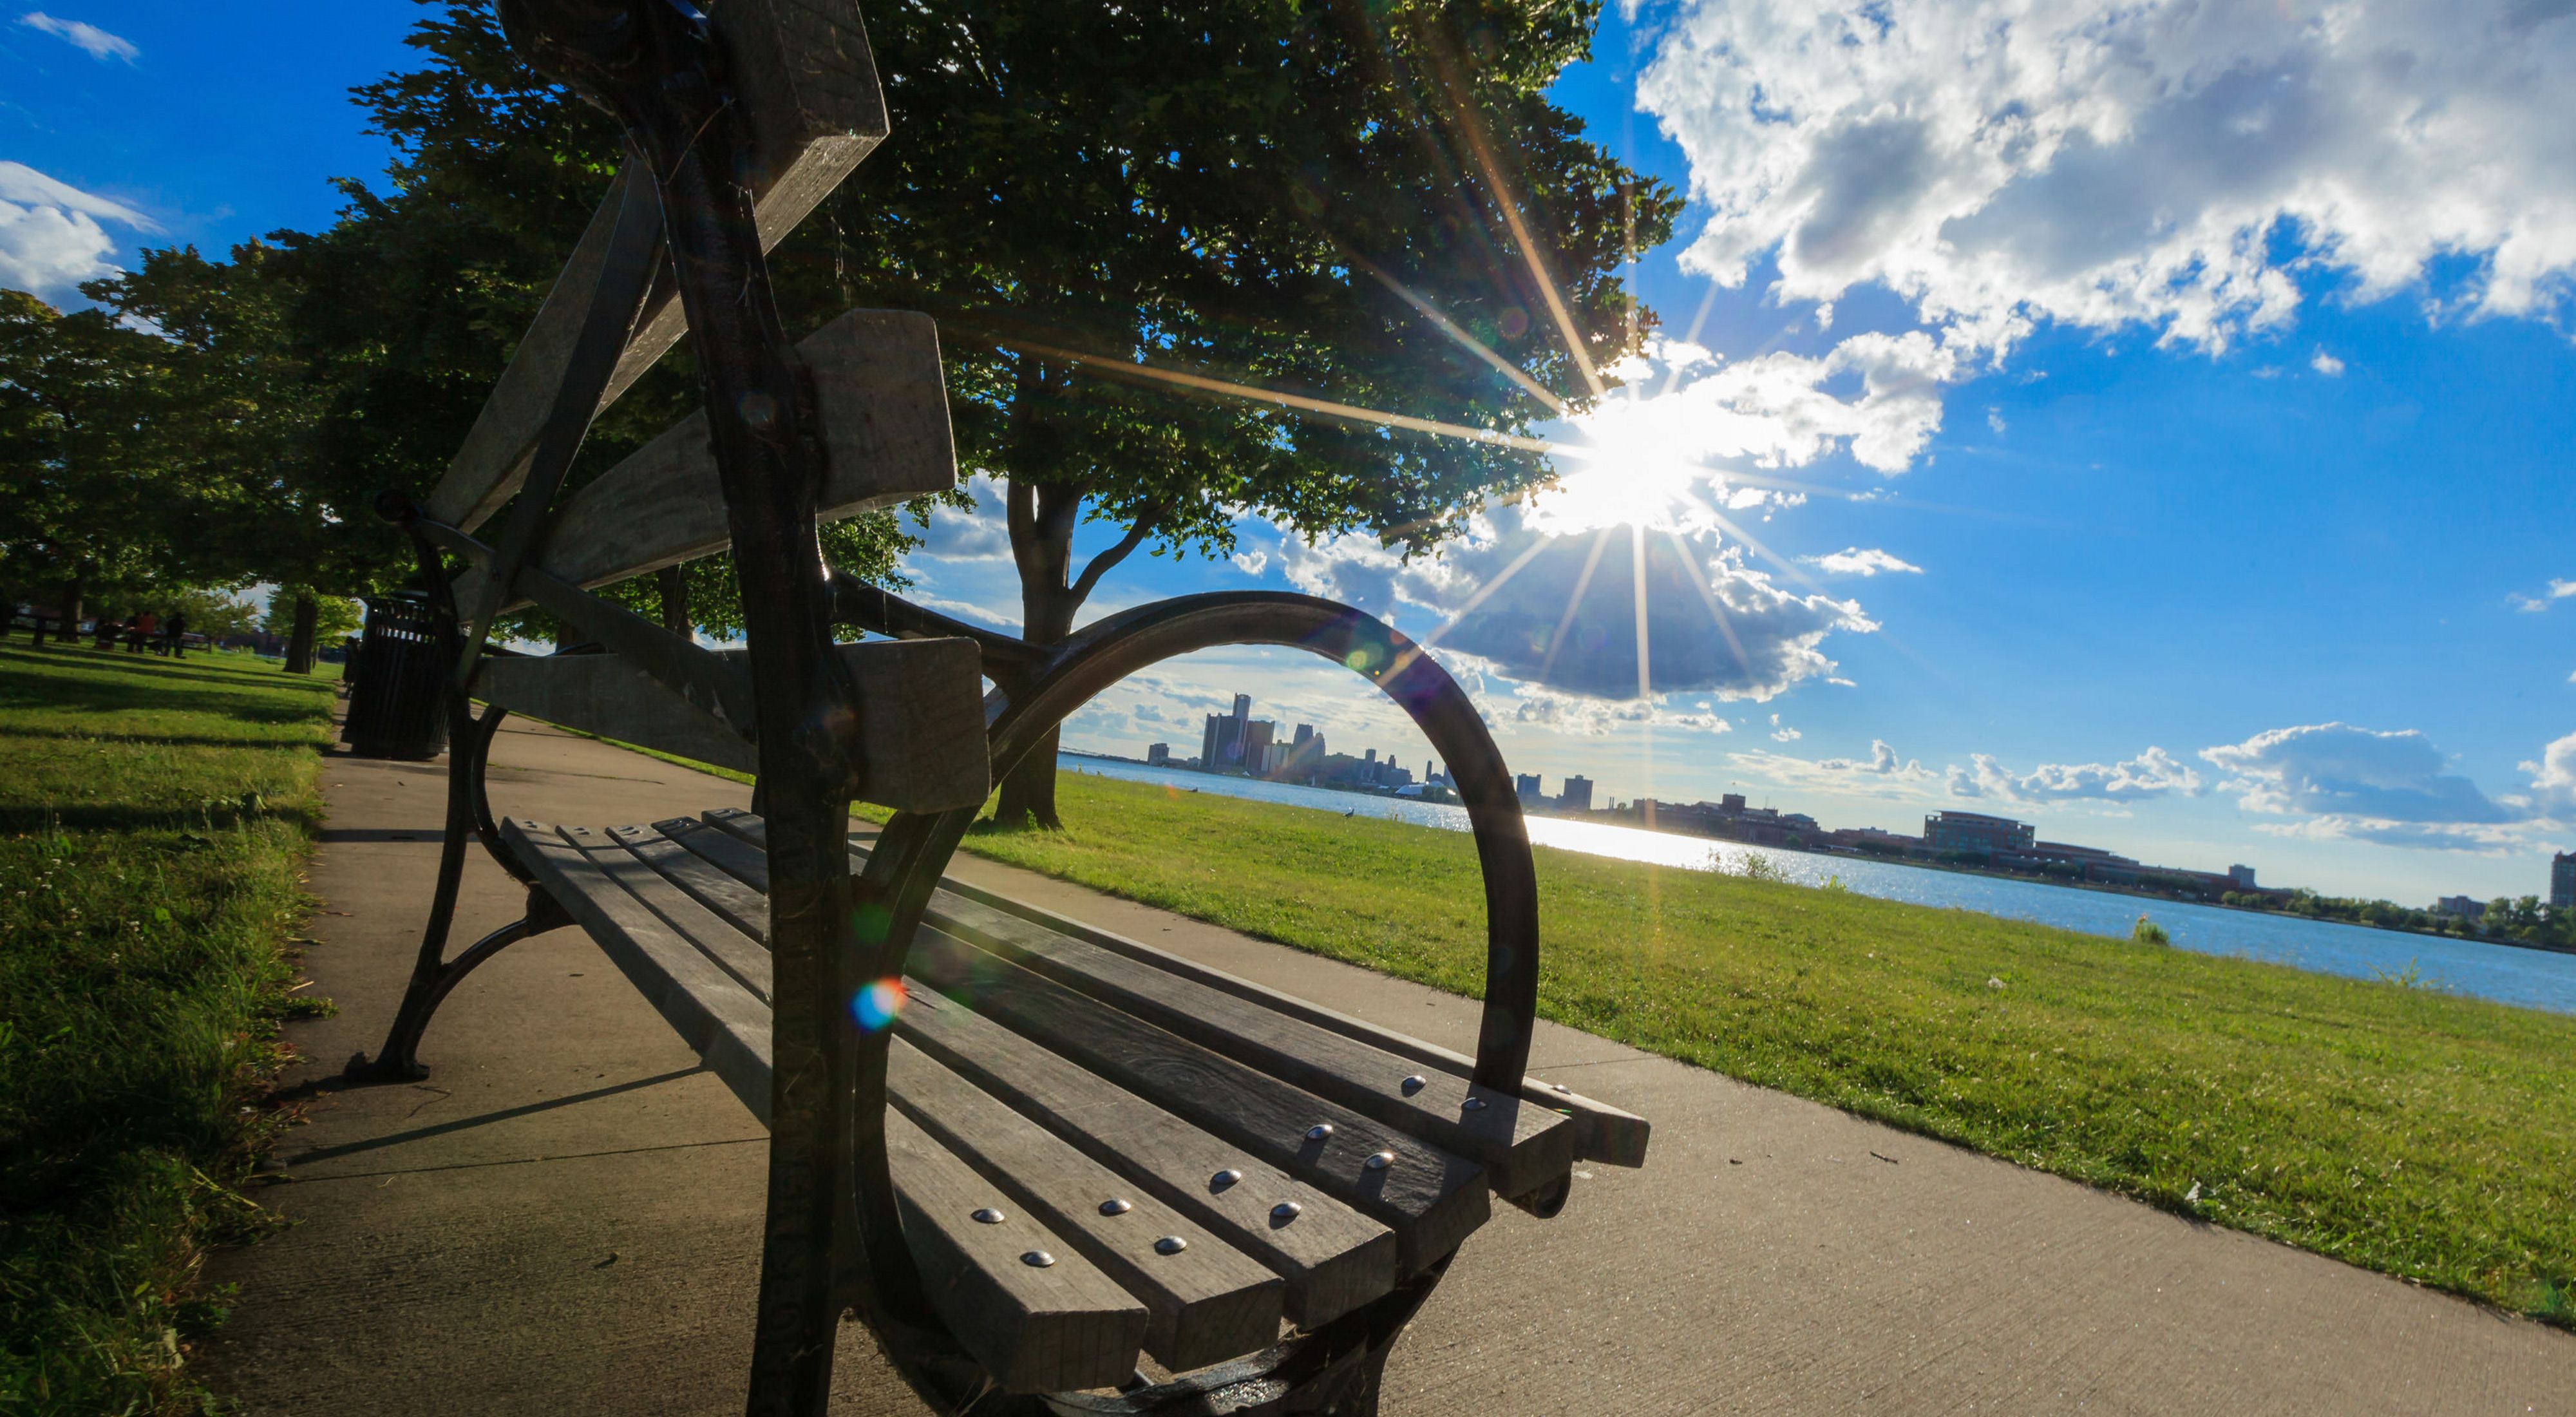 A cast iron and wood park bench along a sidewalk, facing the Detroit River with sun shining through clouds and the city skyline on the opposite shore.